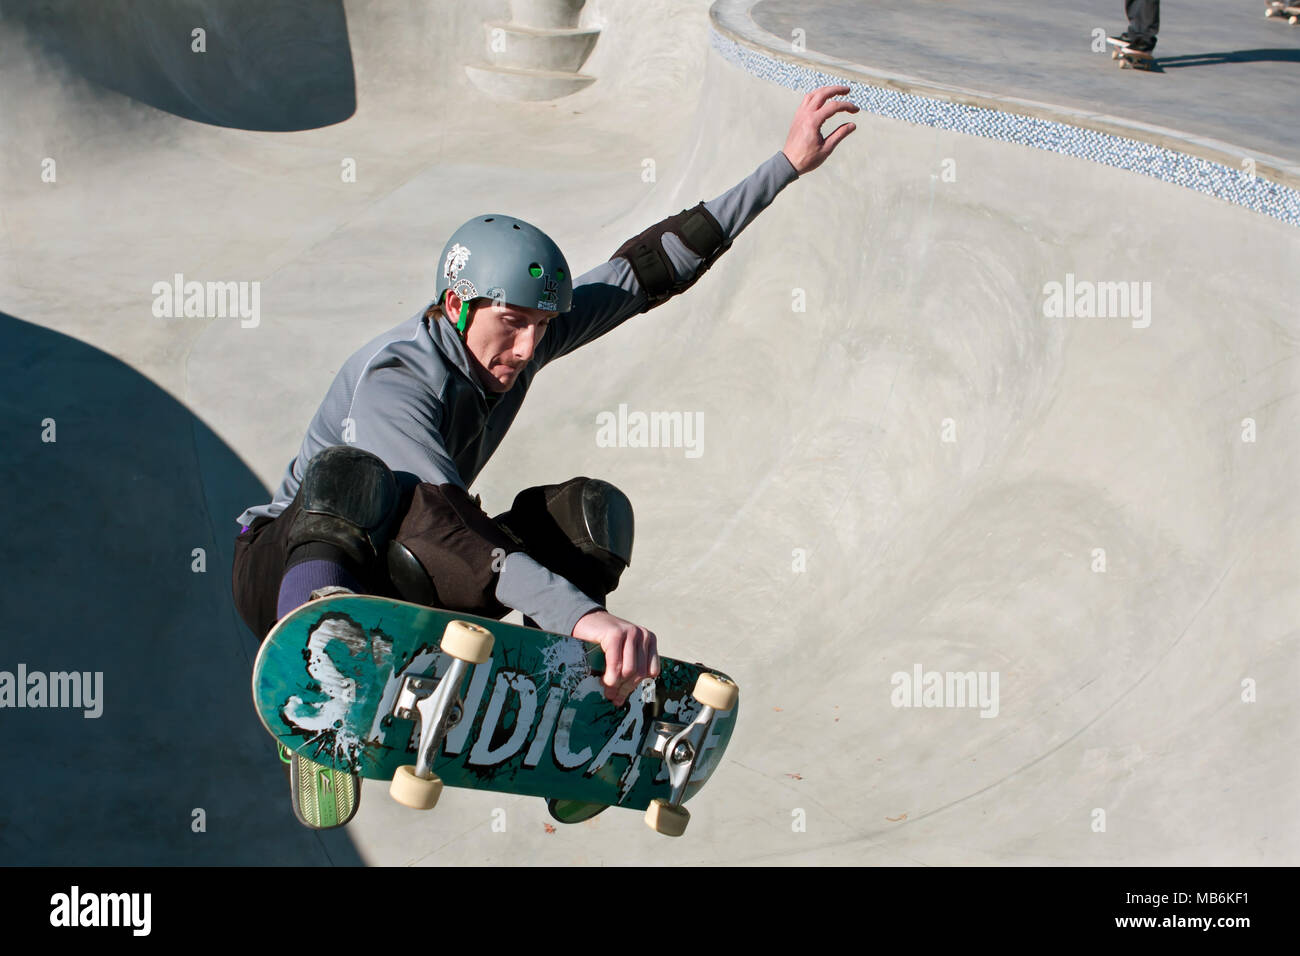 A veteran skateboarder catches air in the bowl during 